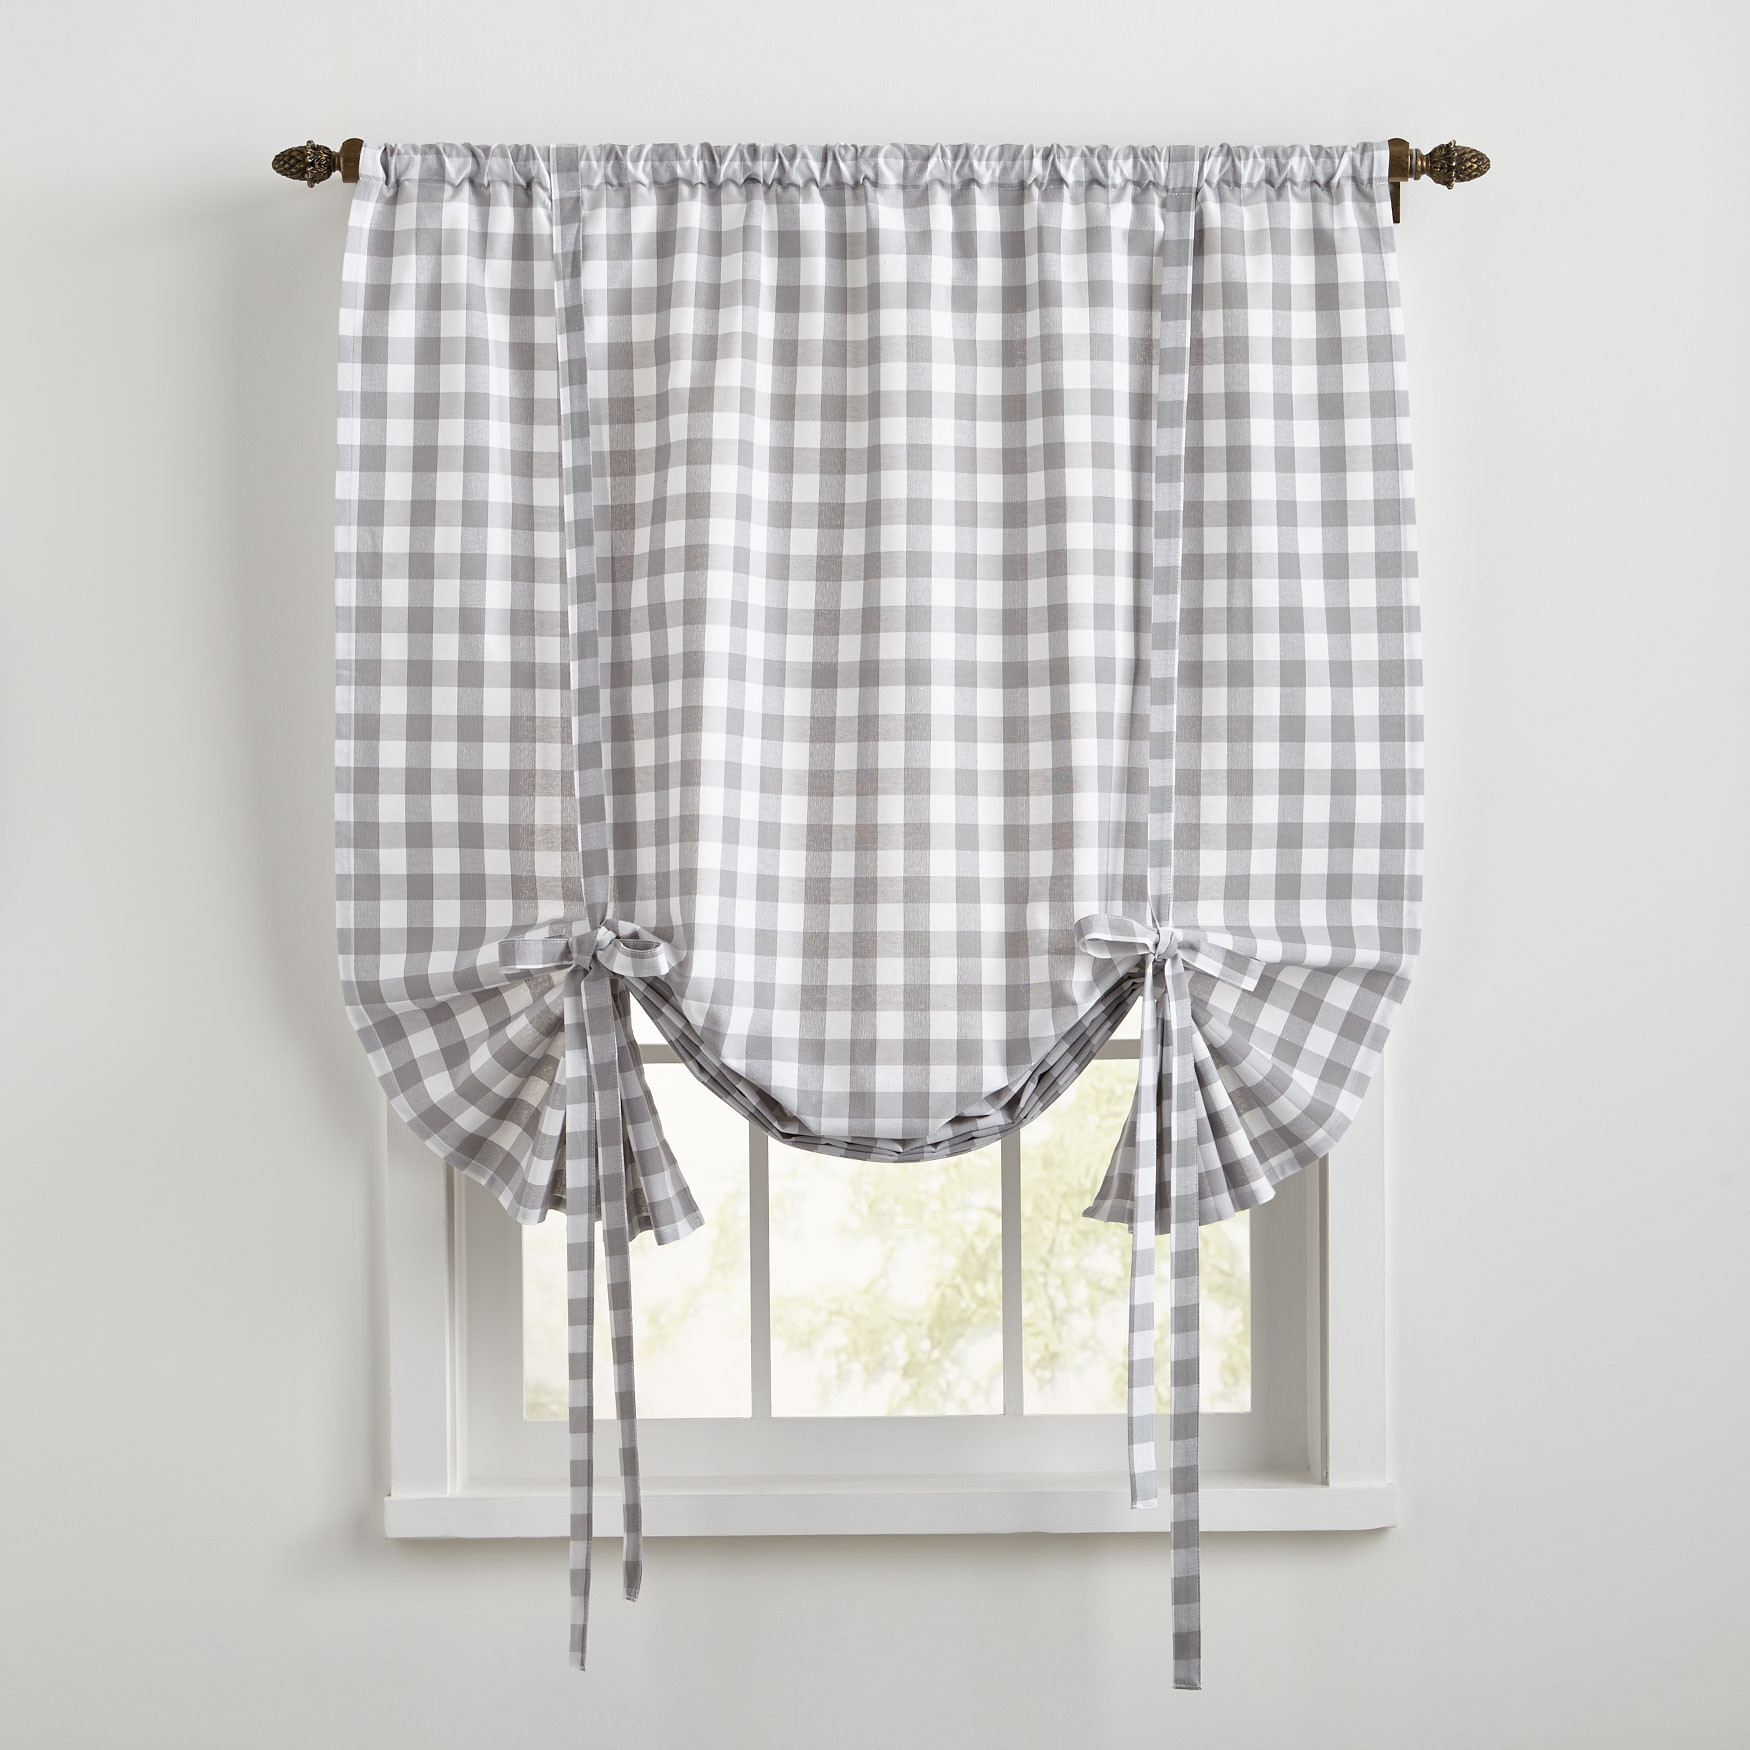 Tie Up Kitchen Curtains Lovely Buffalo Check Tie Up Window Shade Kitchen Curtains Of Tie Up Kitchen Curtains 